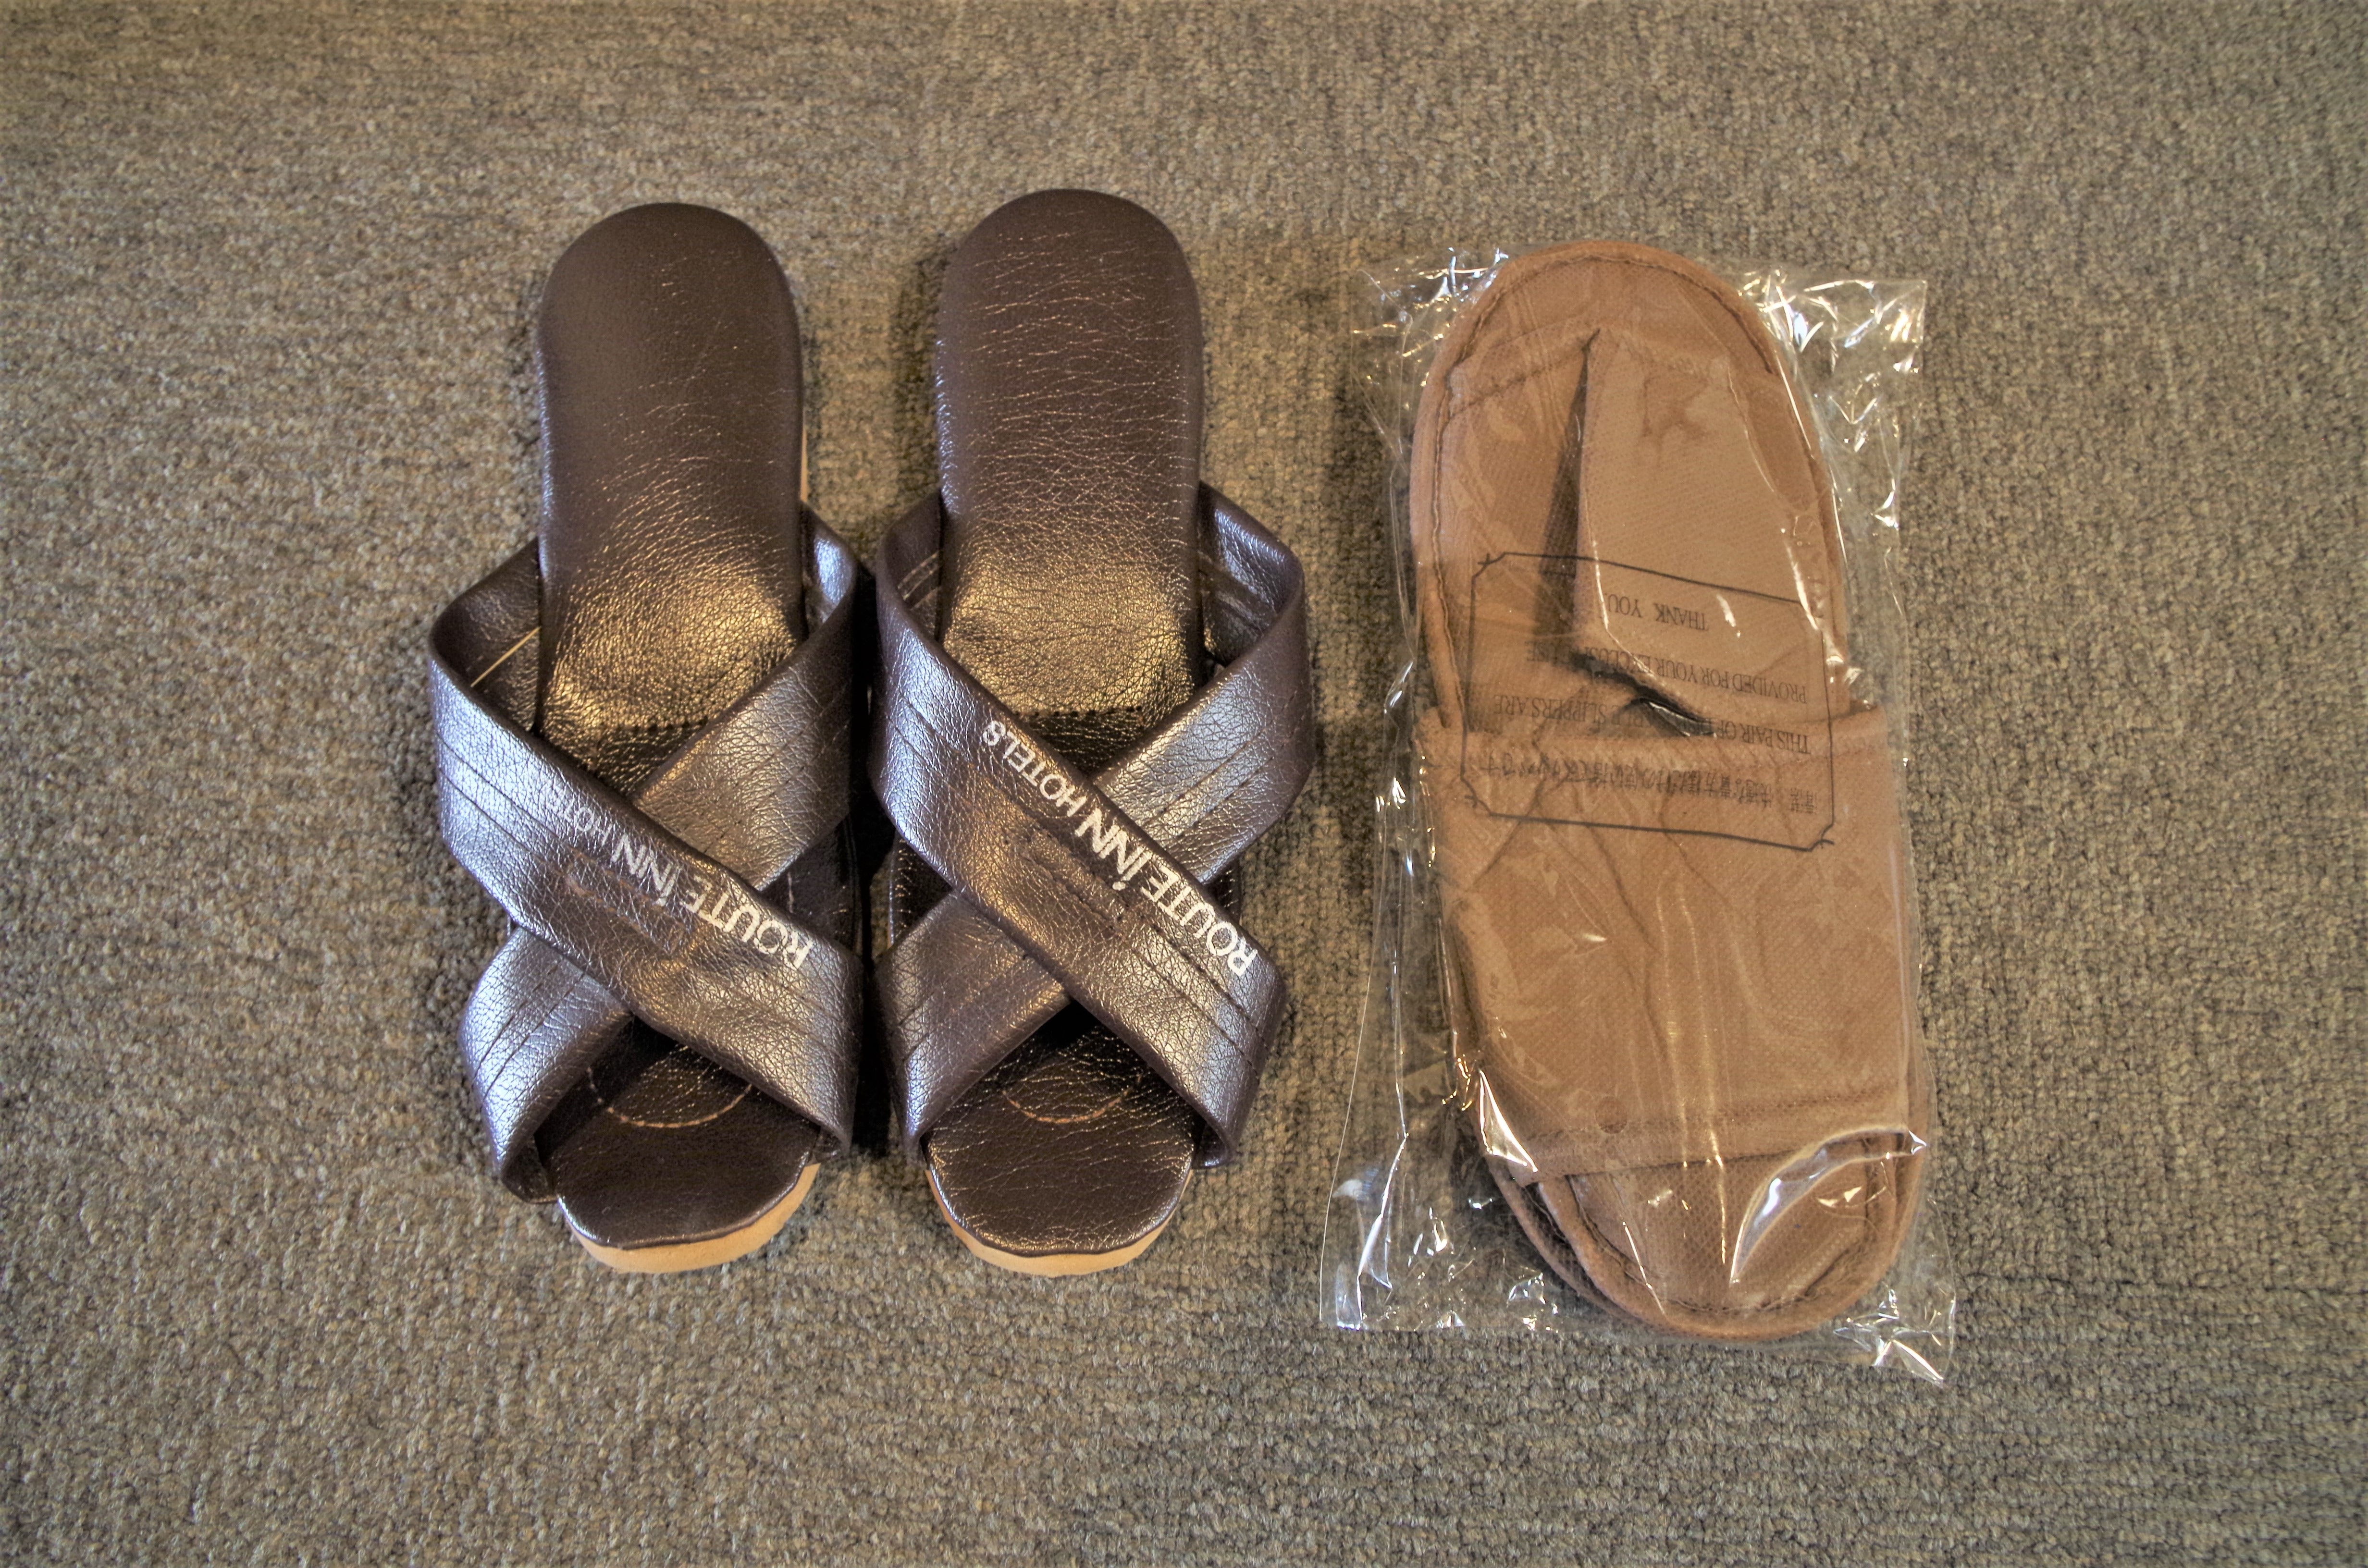 Slippers (Simple slippers can be taken home)